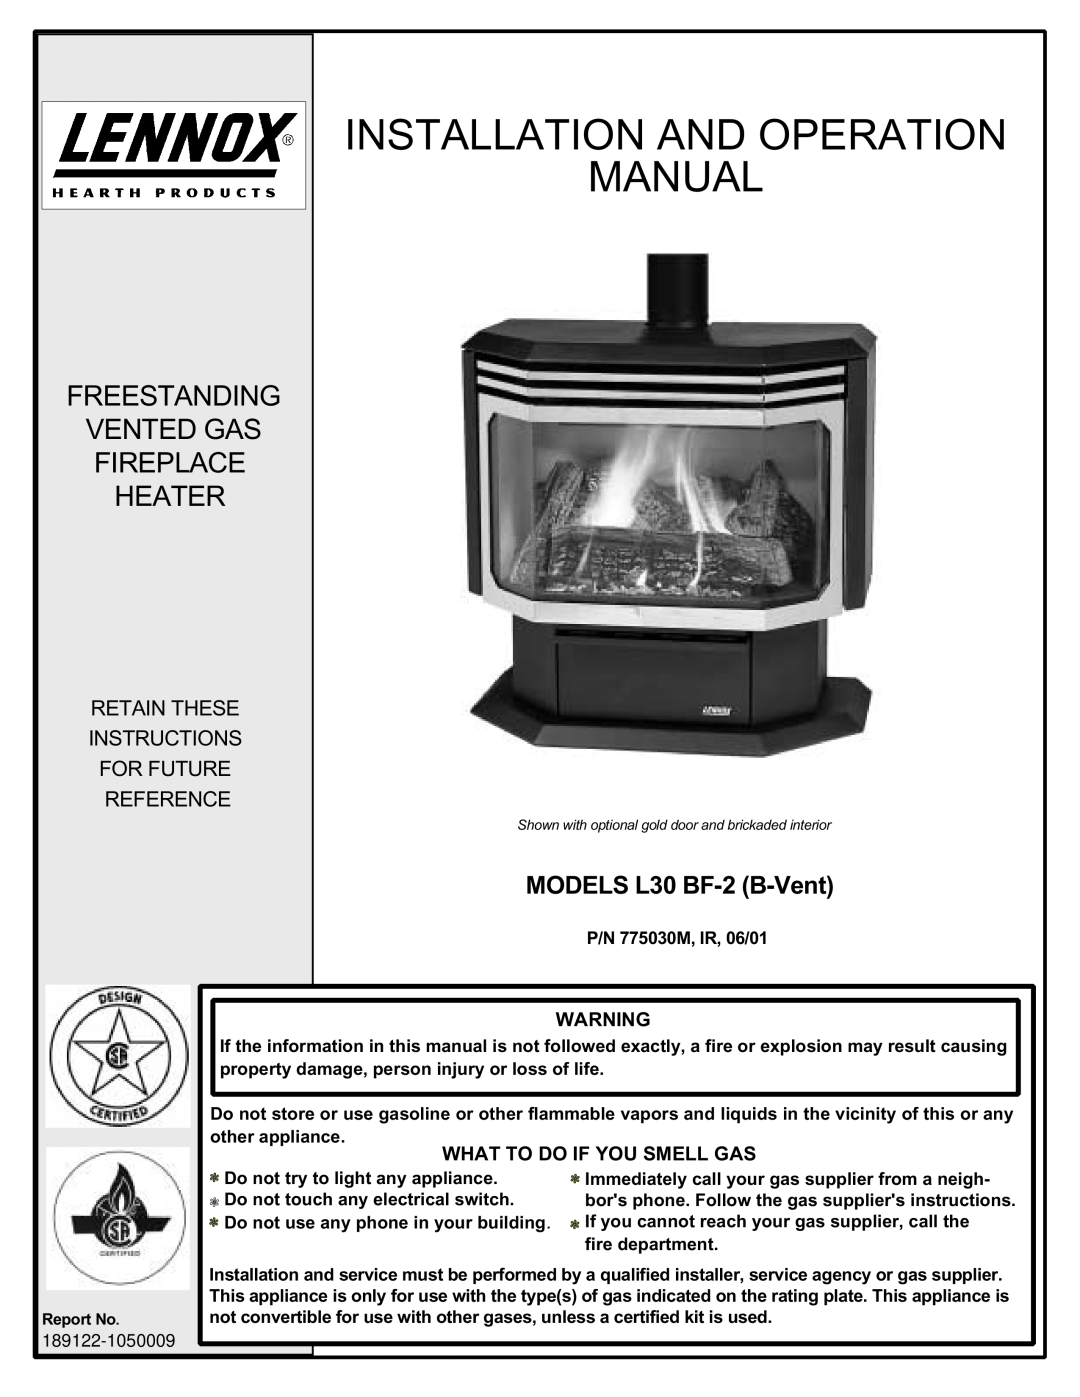 Lenoxx Electronics L30 BF-2 operation manual P/N 775030M, IR, 06/01, Do not try to light any appliance, fire department 